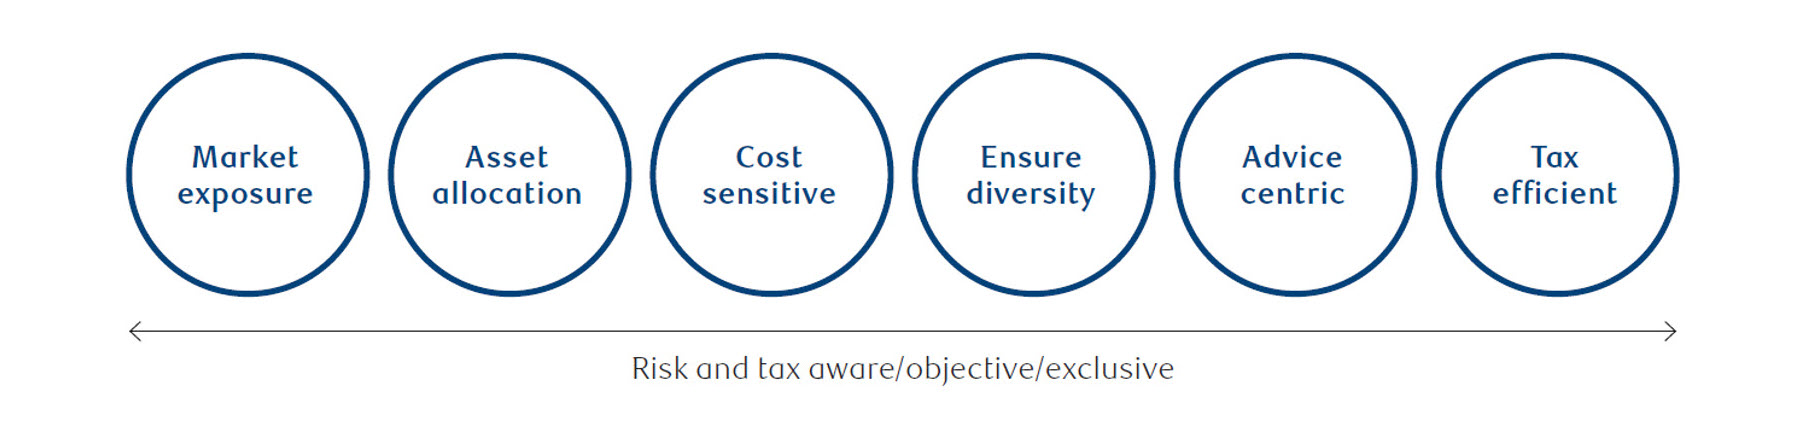 Pillars of our methodology: Market exposure, Asset allocation, Cost sensitive, Ensure diversity, Advice centric, Tax efficient (Risk and tax aware / objective/exclusive)